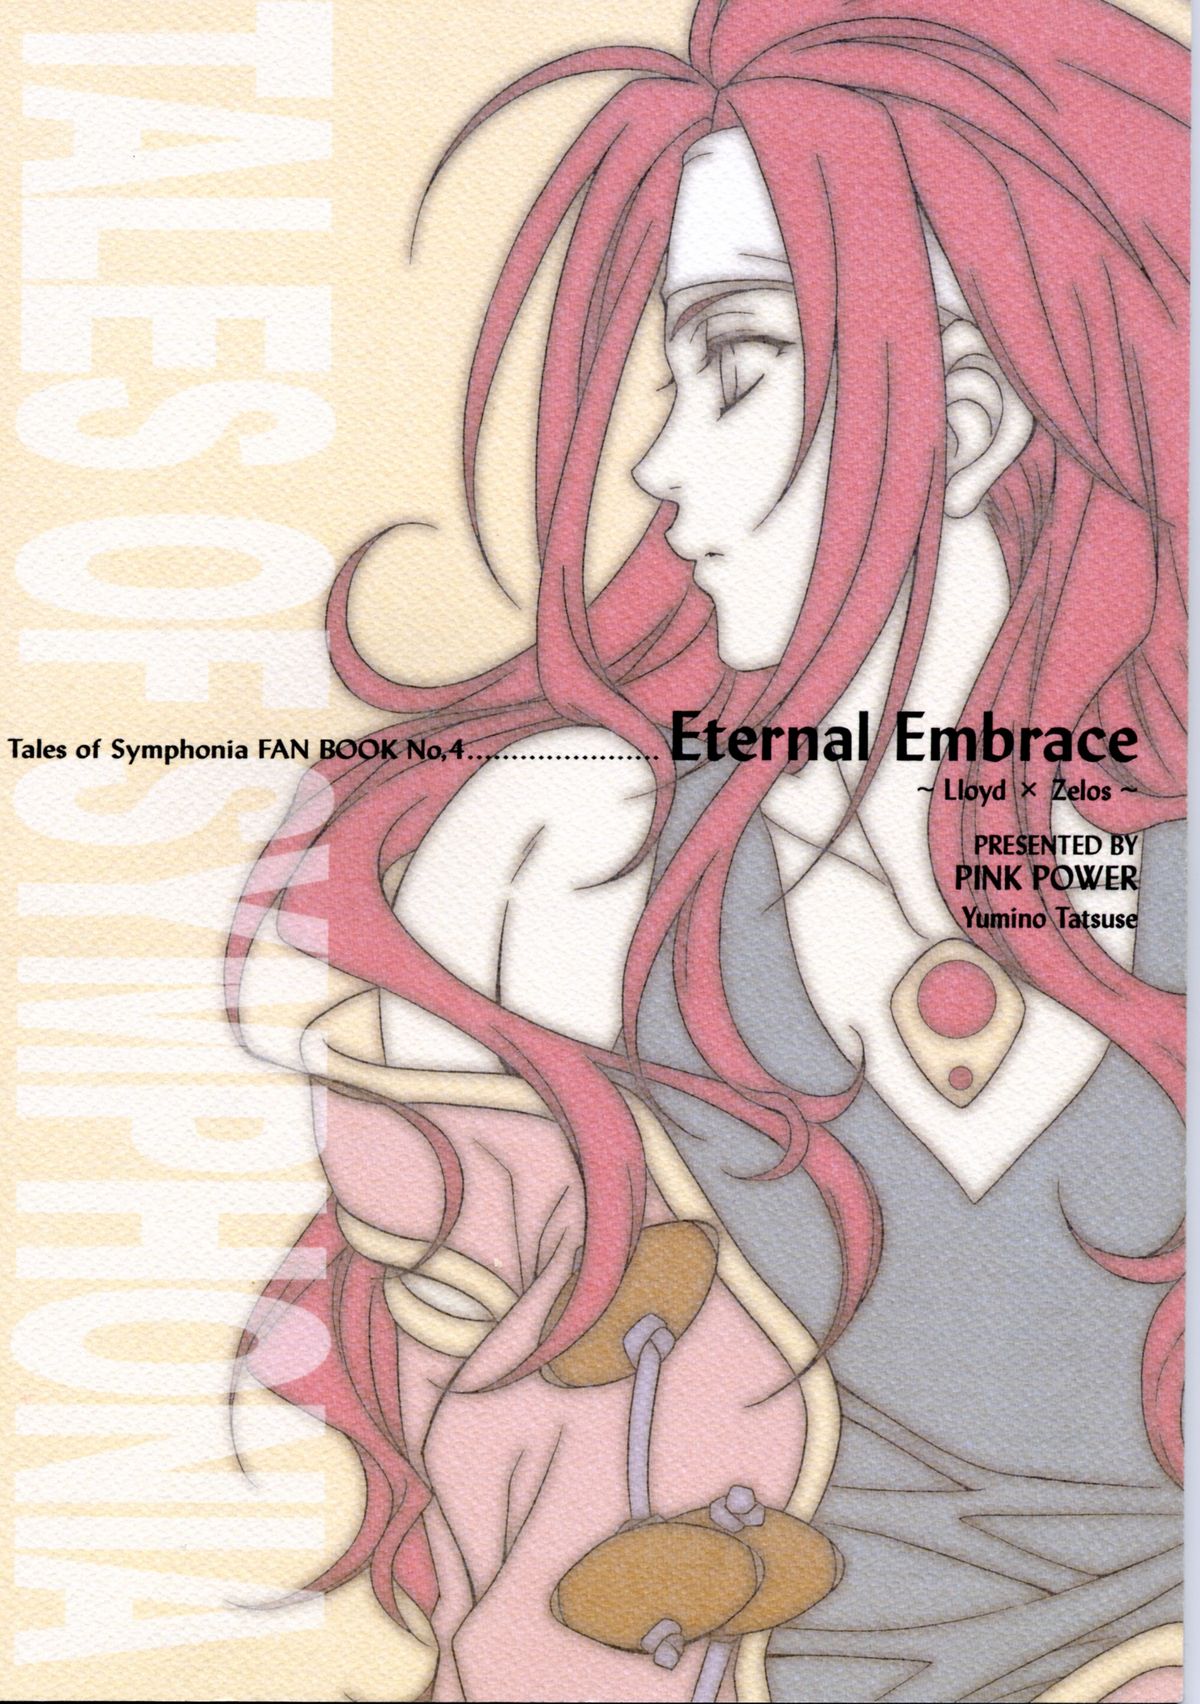 [PINK POWER]  Eternal Embrace (Tales of Symphonia) 